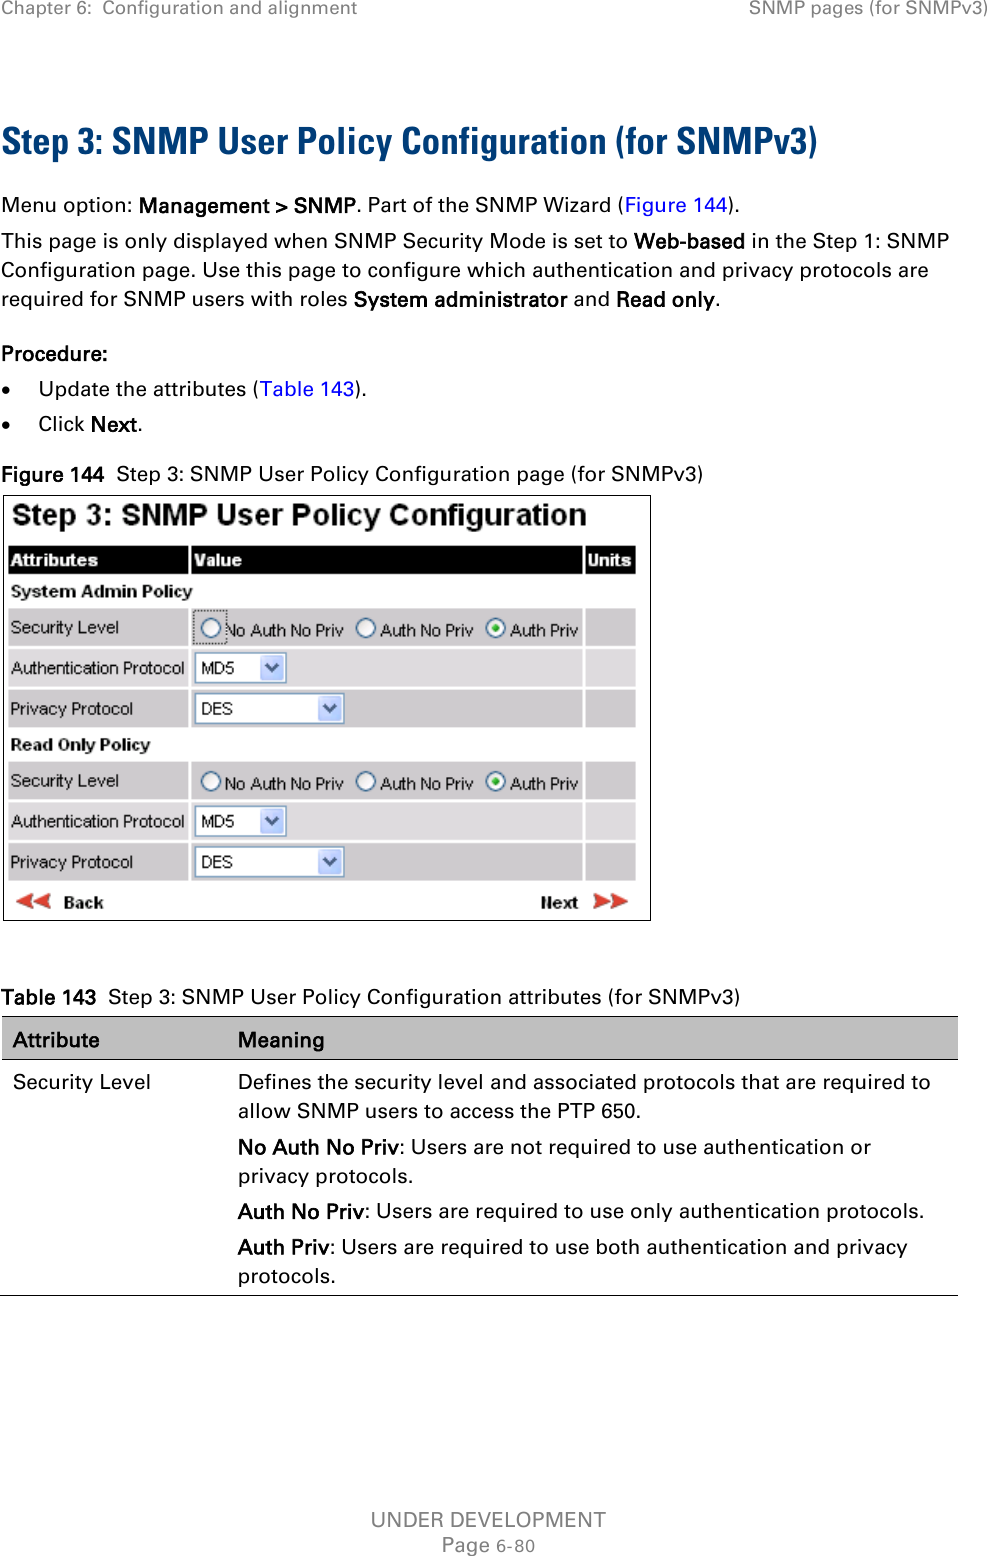 Chapter 6:  Configuration and alignment SNMP pages (for SNMPv3)  Step 3: SNMP User Policy Configuration (for SNMPv3) Menu option: Management &gt; SNMP. Part of the SNMP Wizard (Figure 144). This page is only displayed when SNMP Security Mode is set to Web-based in the Step 1: SNMP Configuration page. Use this page to configure which authentication and privacy protocols are required for SNMP users with roles System administrator and Read only. Procedure: • Update the attributes (Table 143). • Click Next. Figure 144  Step 3: SNMP User Policy Configuration page (for SNMPv3)   Table 143  Step 3: SNMP User Policy Configuration attributes (for SNMPv3) Attribute Meaning Security Level Defines the security level and associated protocols that are required to allow SNMP users to access the PTP 650. No Auth No Priv: Users are not required to use authentication or privacy protocols. Auth No Priv: Users are required to use only authentication protocols. Auth Priv: Users are required to use both authentication and privacy protocols. UNDER DEVELOPMENT Page 6-80 